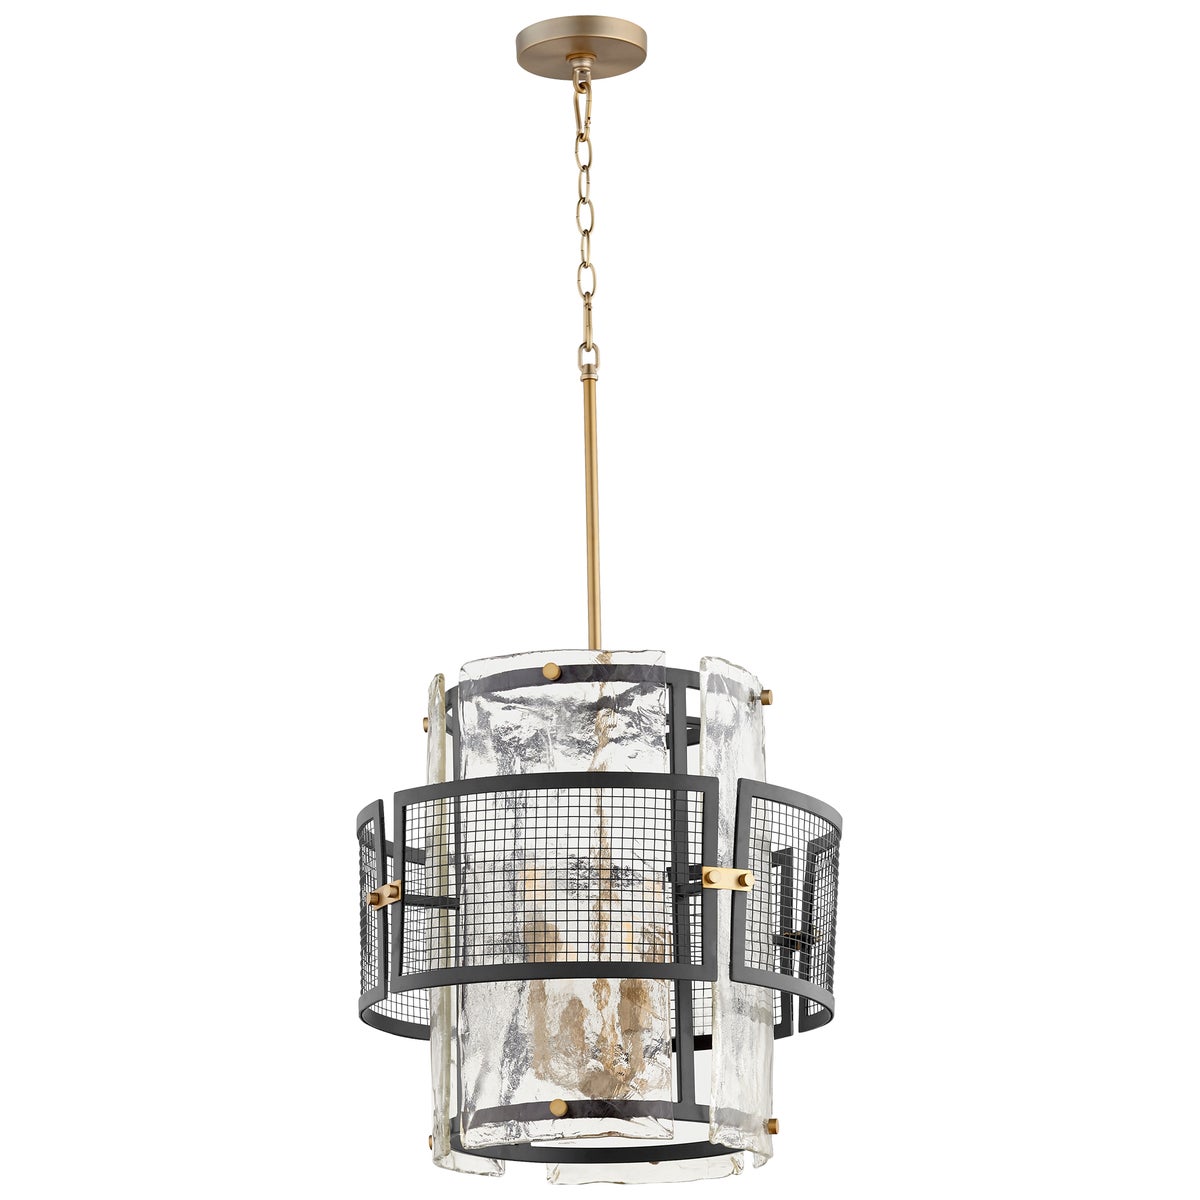 Panorama Chandelier | Noir & Aged Brass - Small